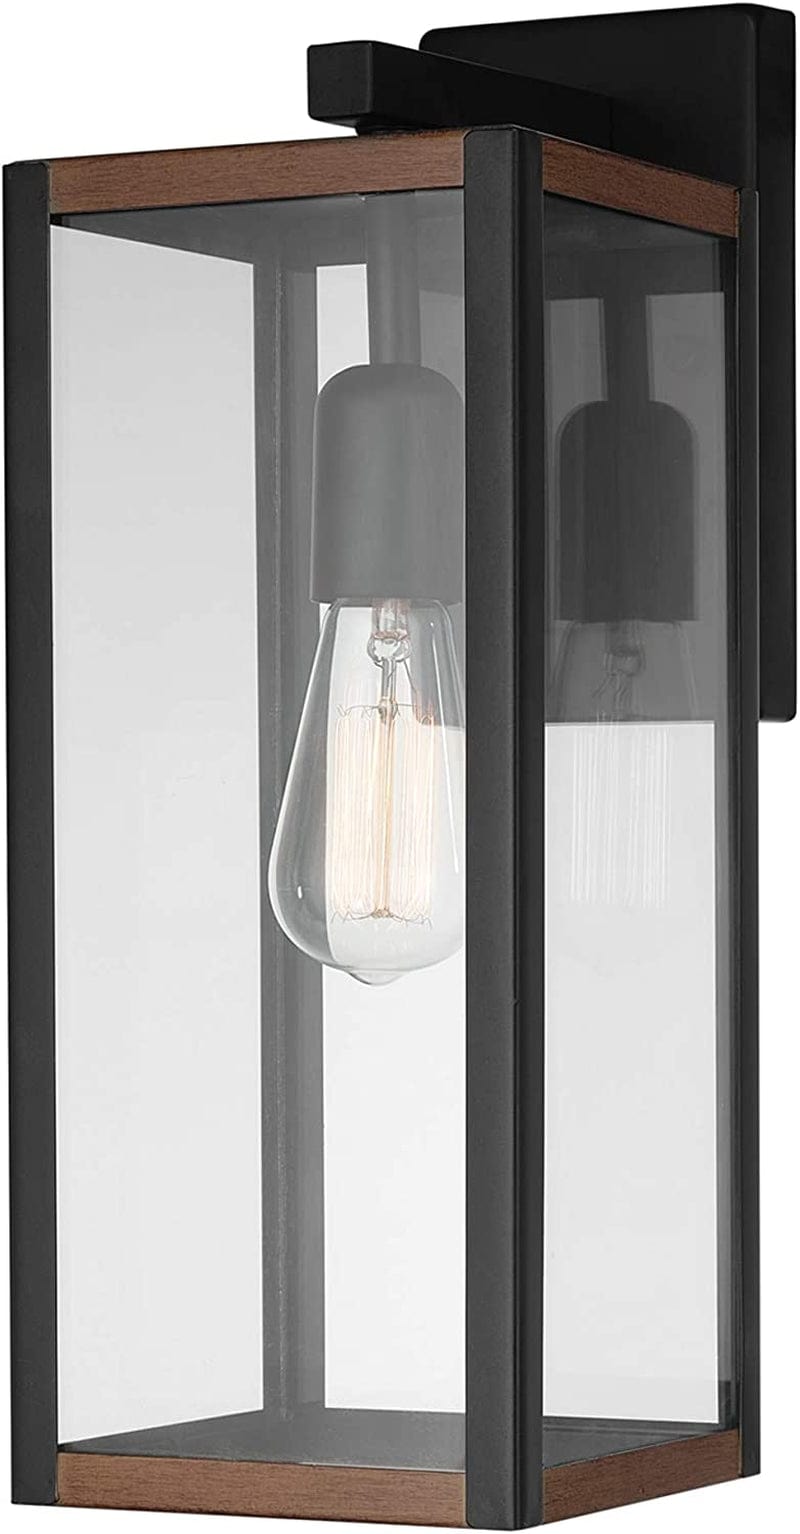 Globe Electric 44176 1-Light Outdoor Indoor Wall Sconce, Matte Black, Glass Panes, Weather Resistant, Wall Lighting, Wall Lamp Dimmable, Kitchen Sconces Wall Lighting, Home Improvement, Porch Light